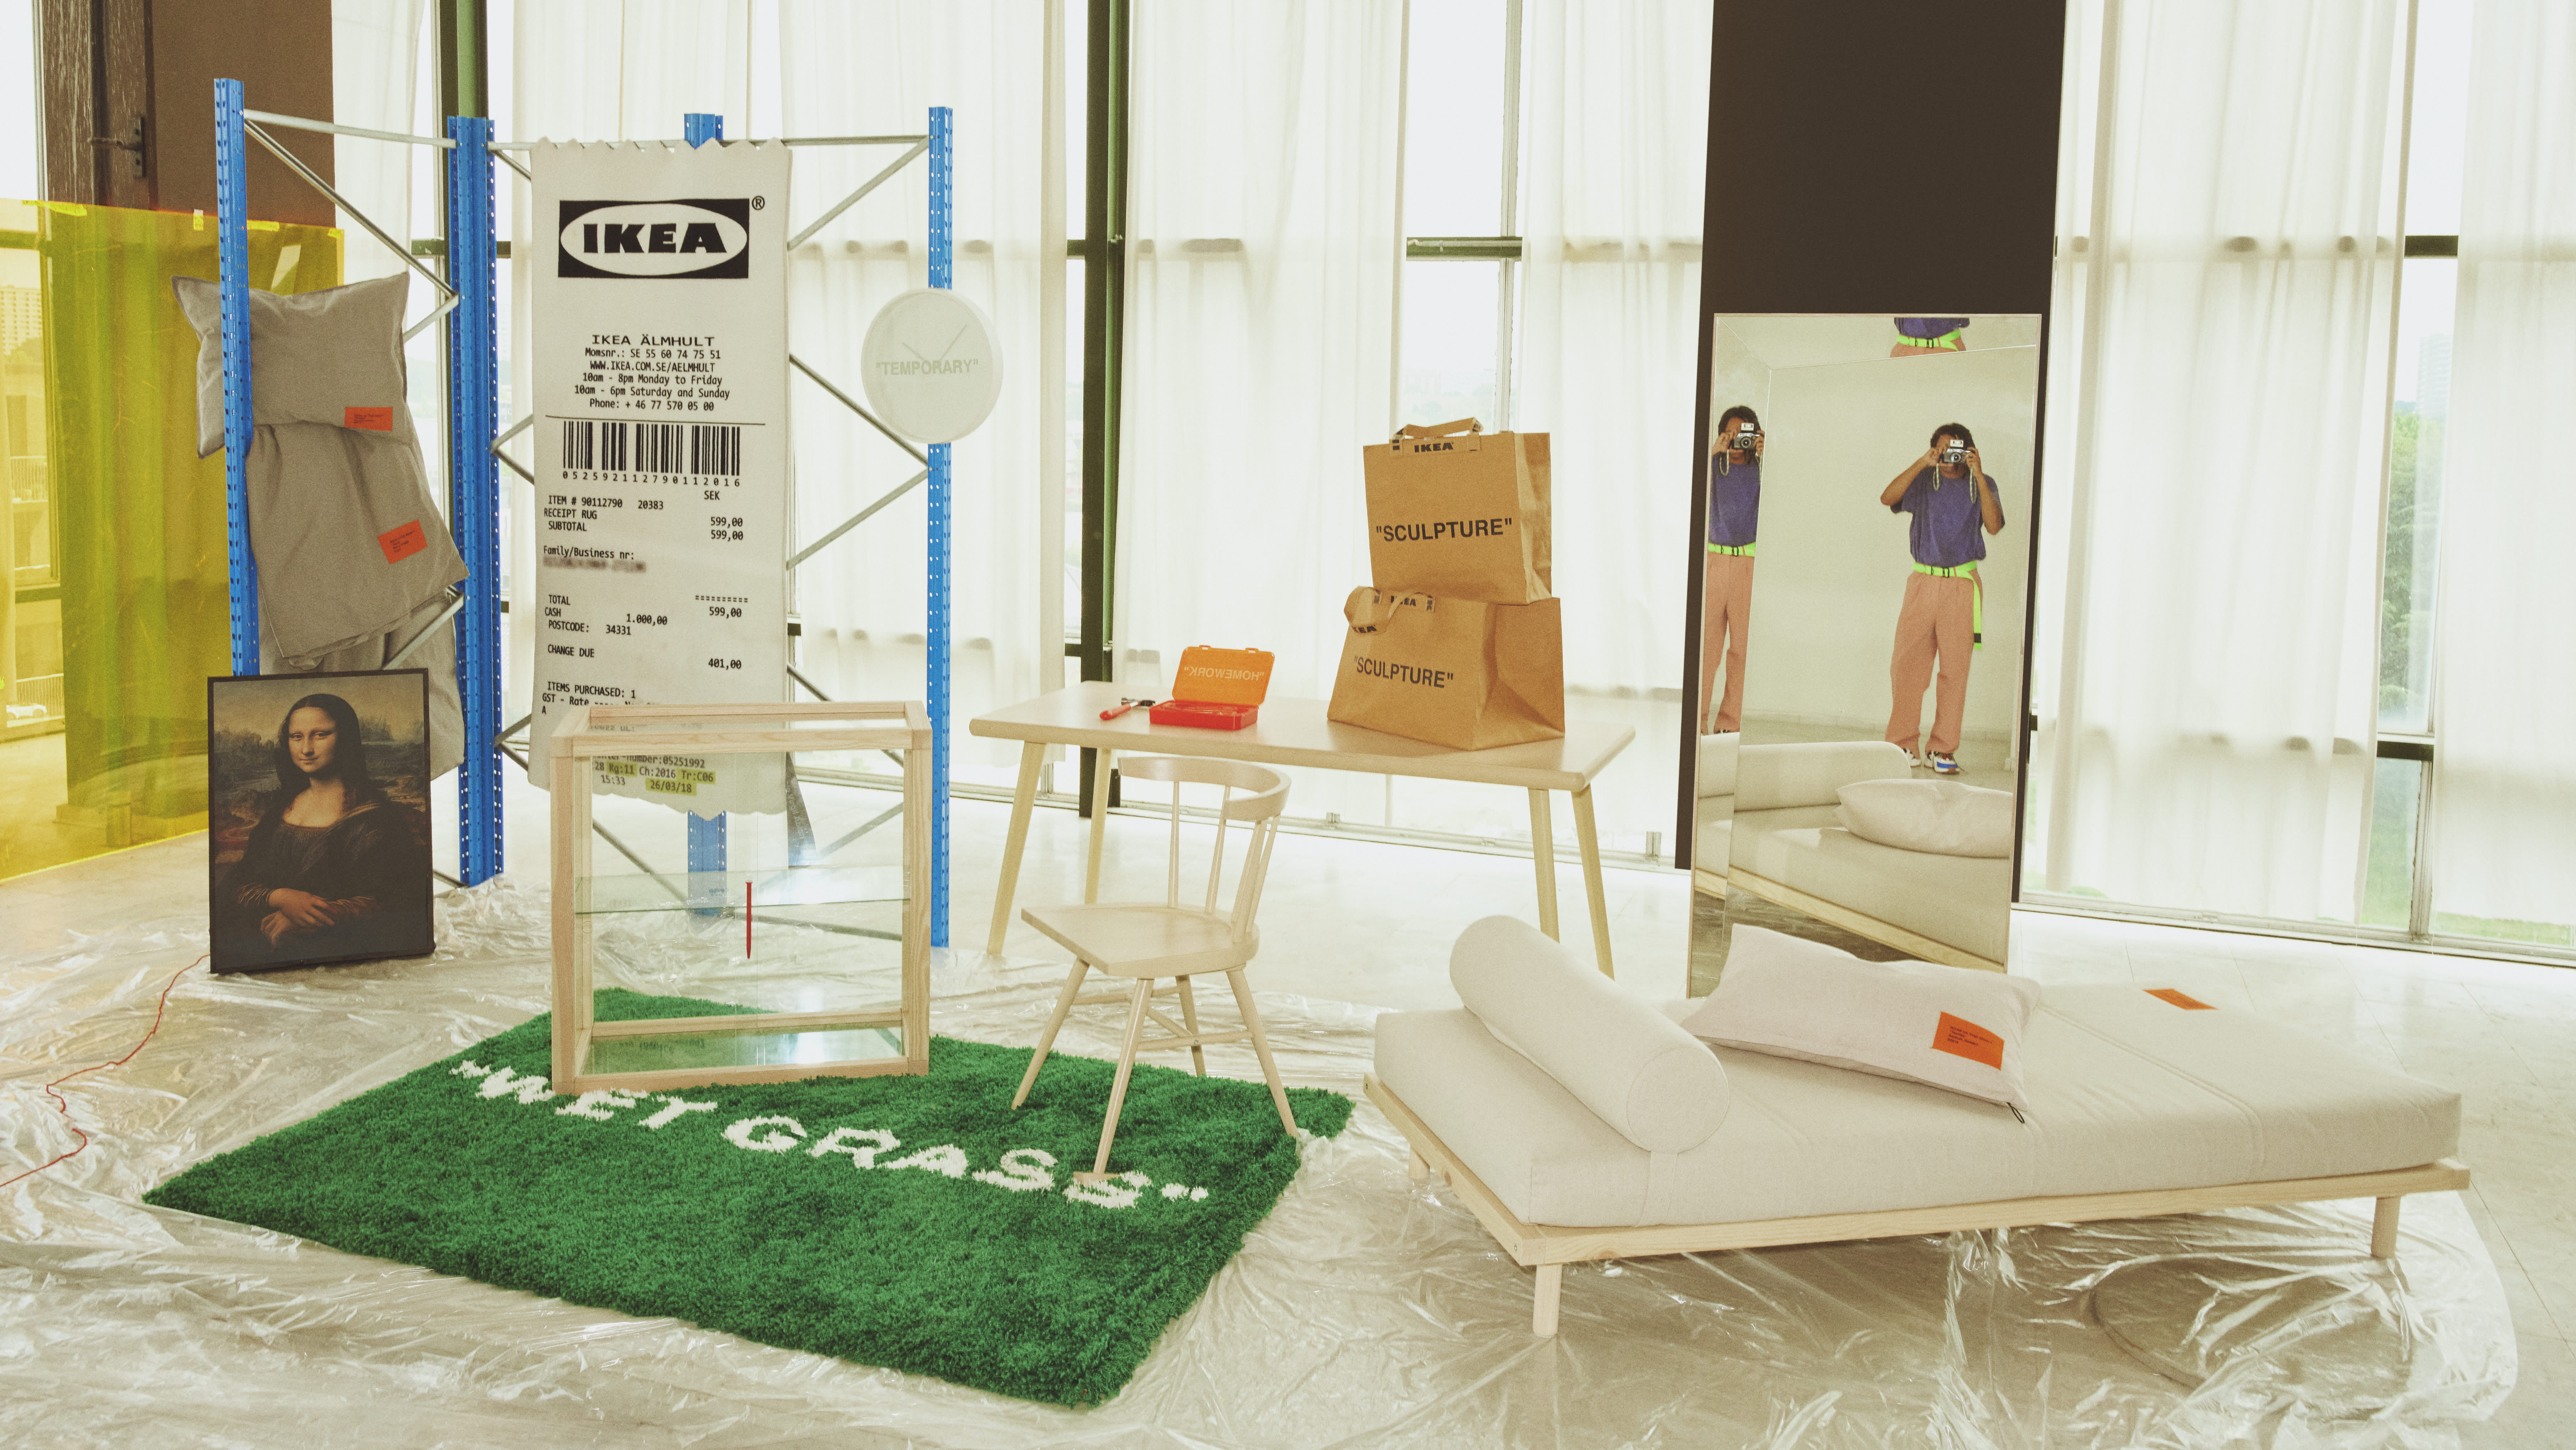 Off White x IKEA MARKERAD “HOMEWORK” Toolkit – From Another